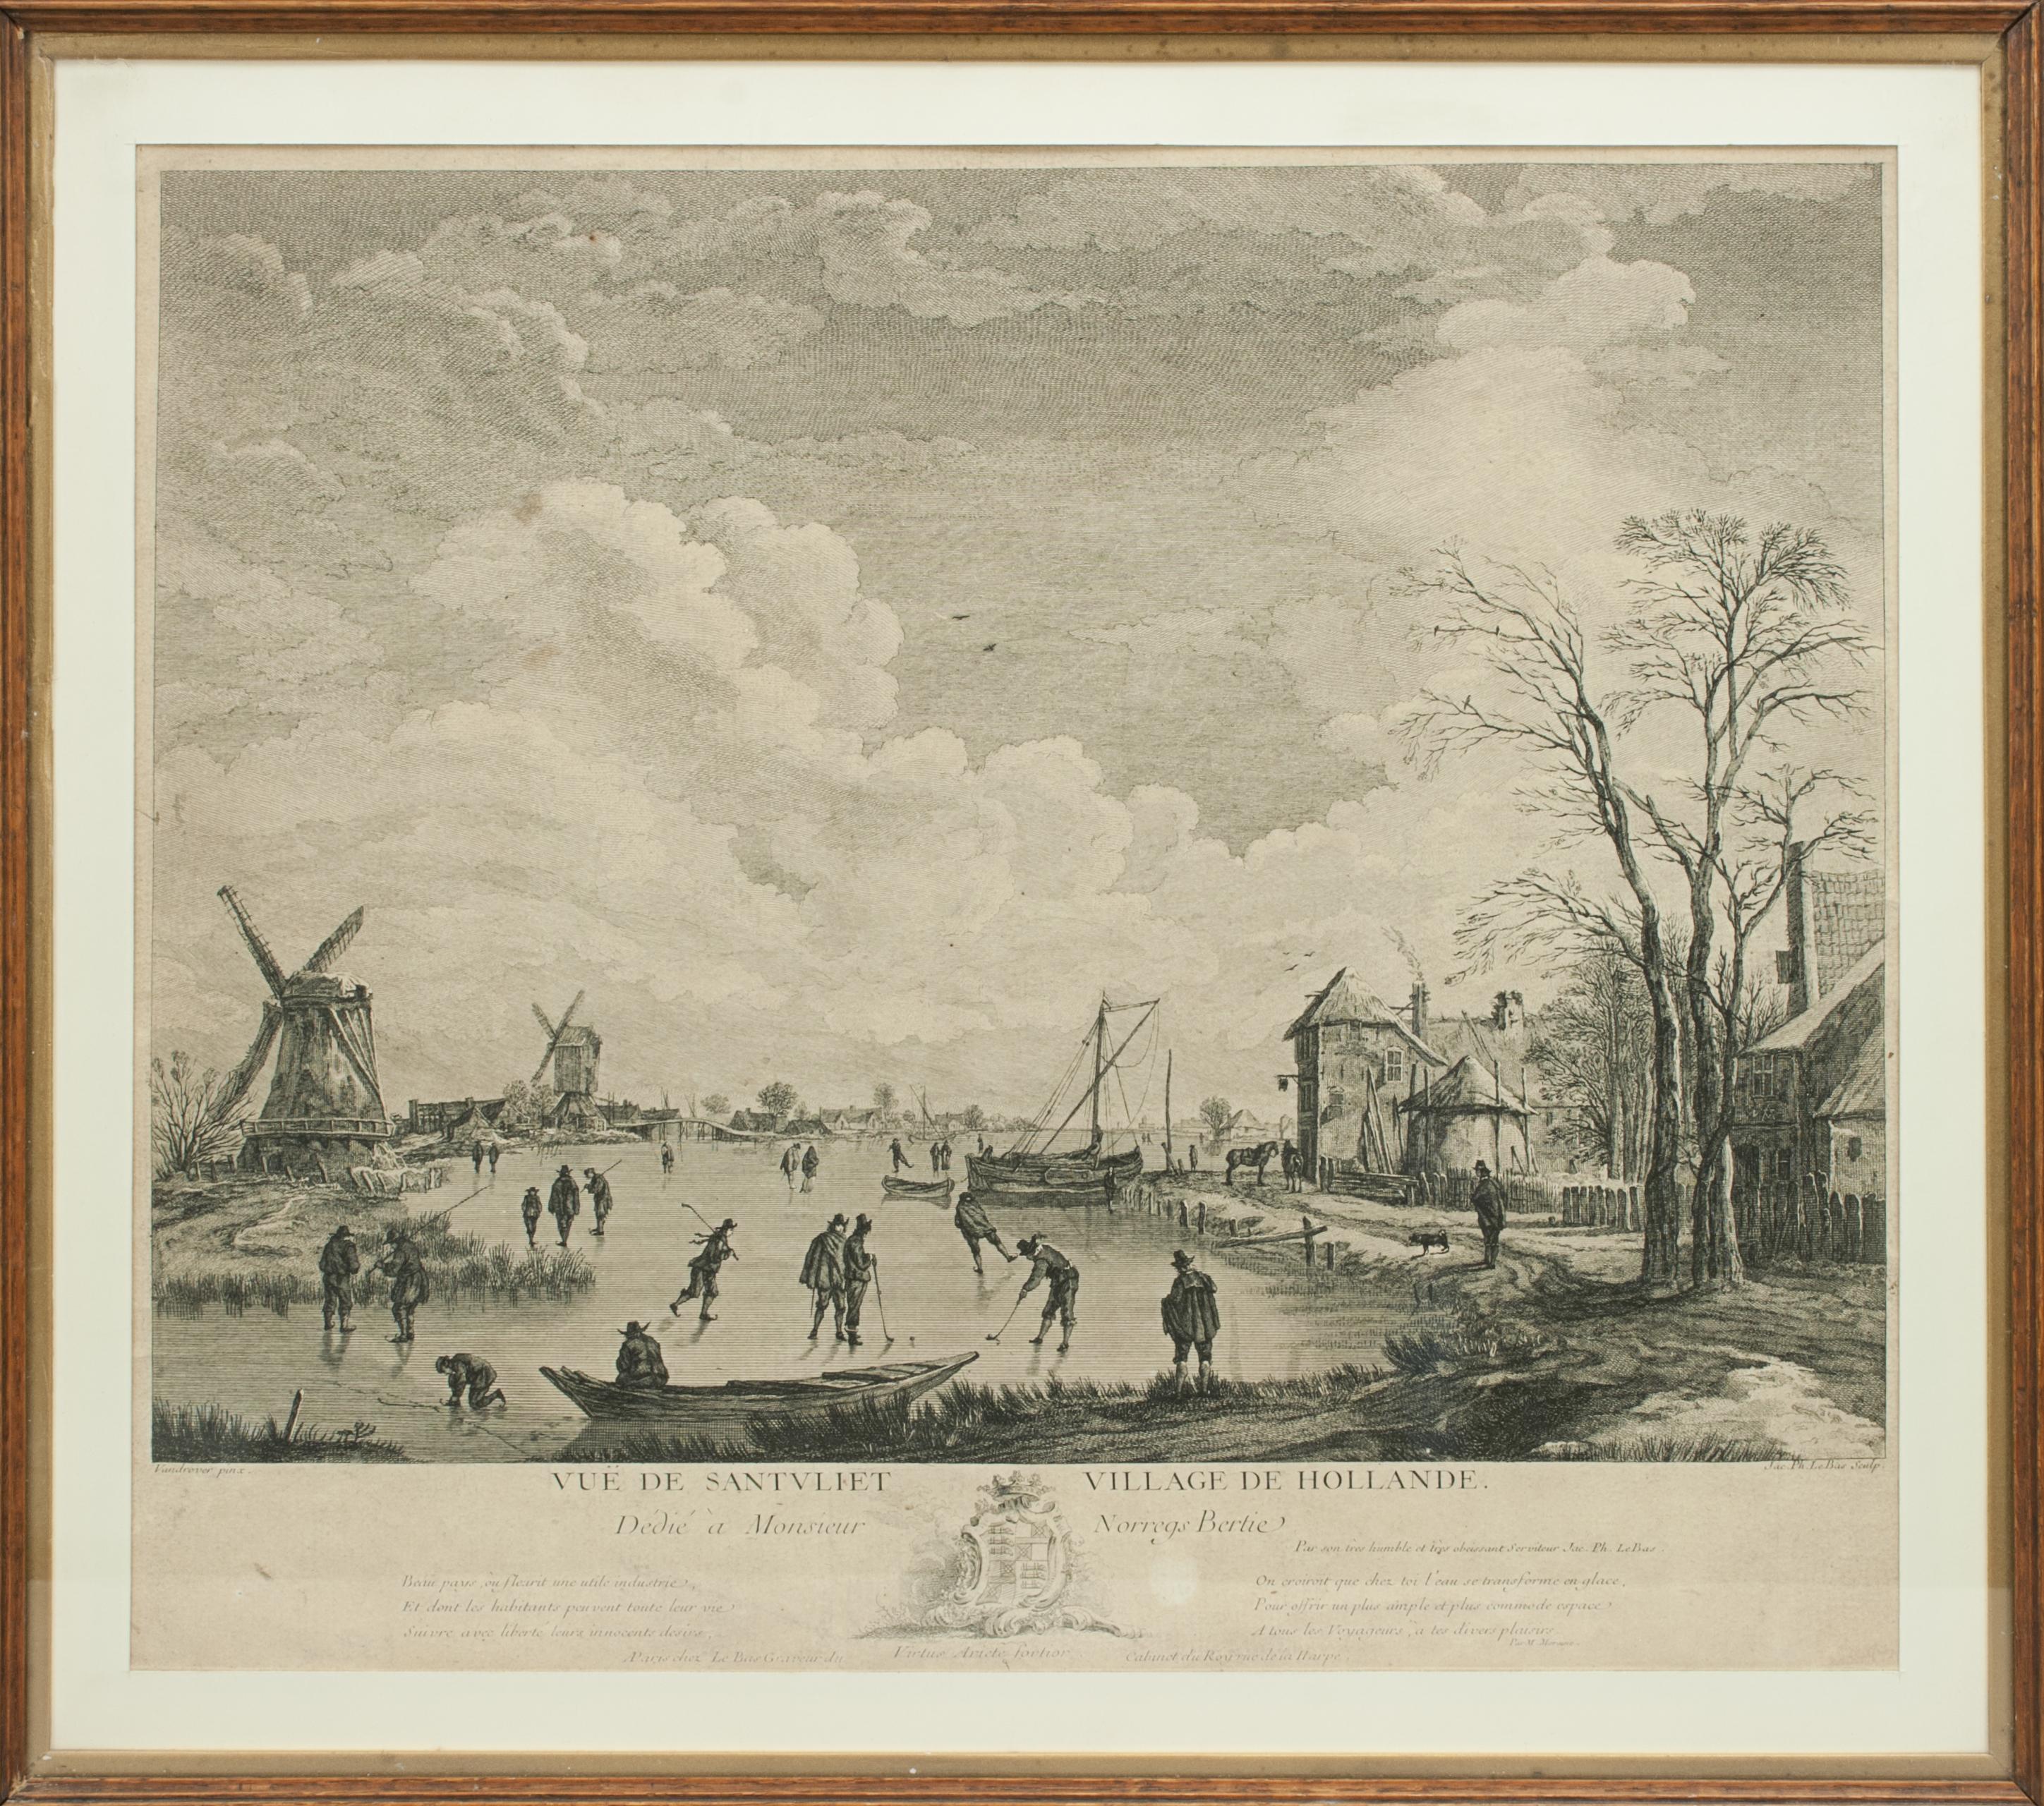 Dutch Golf Engraving By Jacques-Philippe Lebas, Vuë De Santvliet Village De Hollande.
Rare 18th century Dutch golf engraving by Jacques-Philippe Lebas depicting Dutchman playing the early form of golf on the ice. The Kolf engraving is entitled 'Vuë